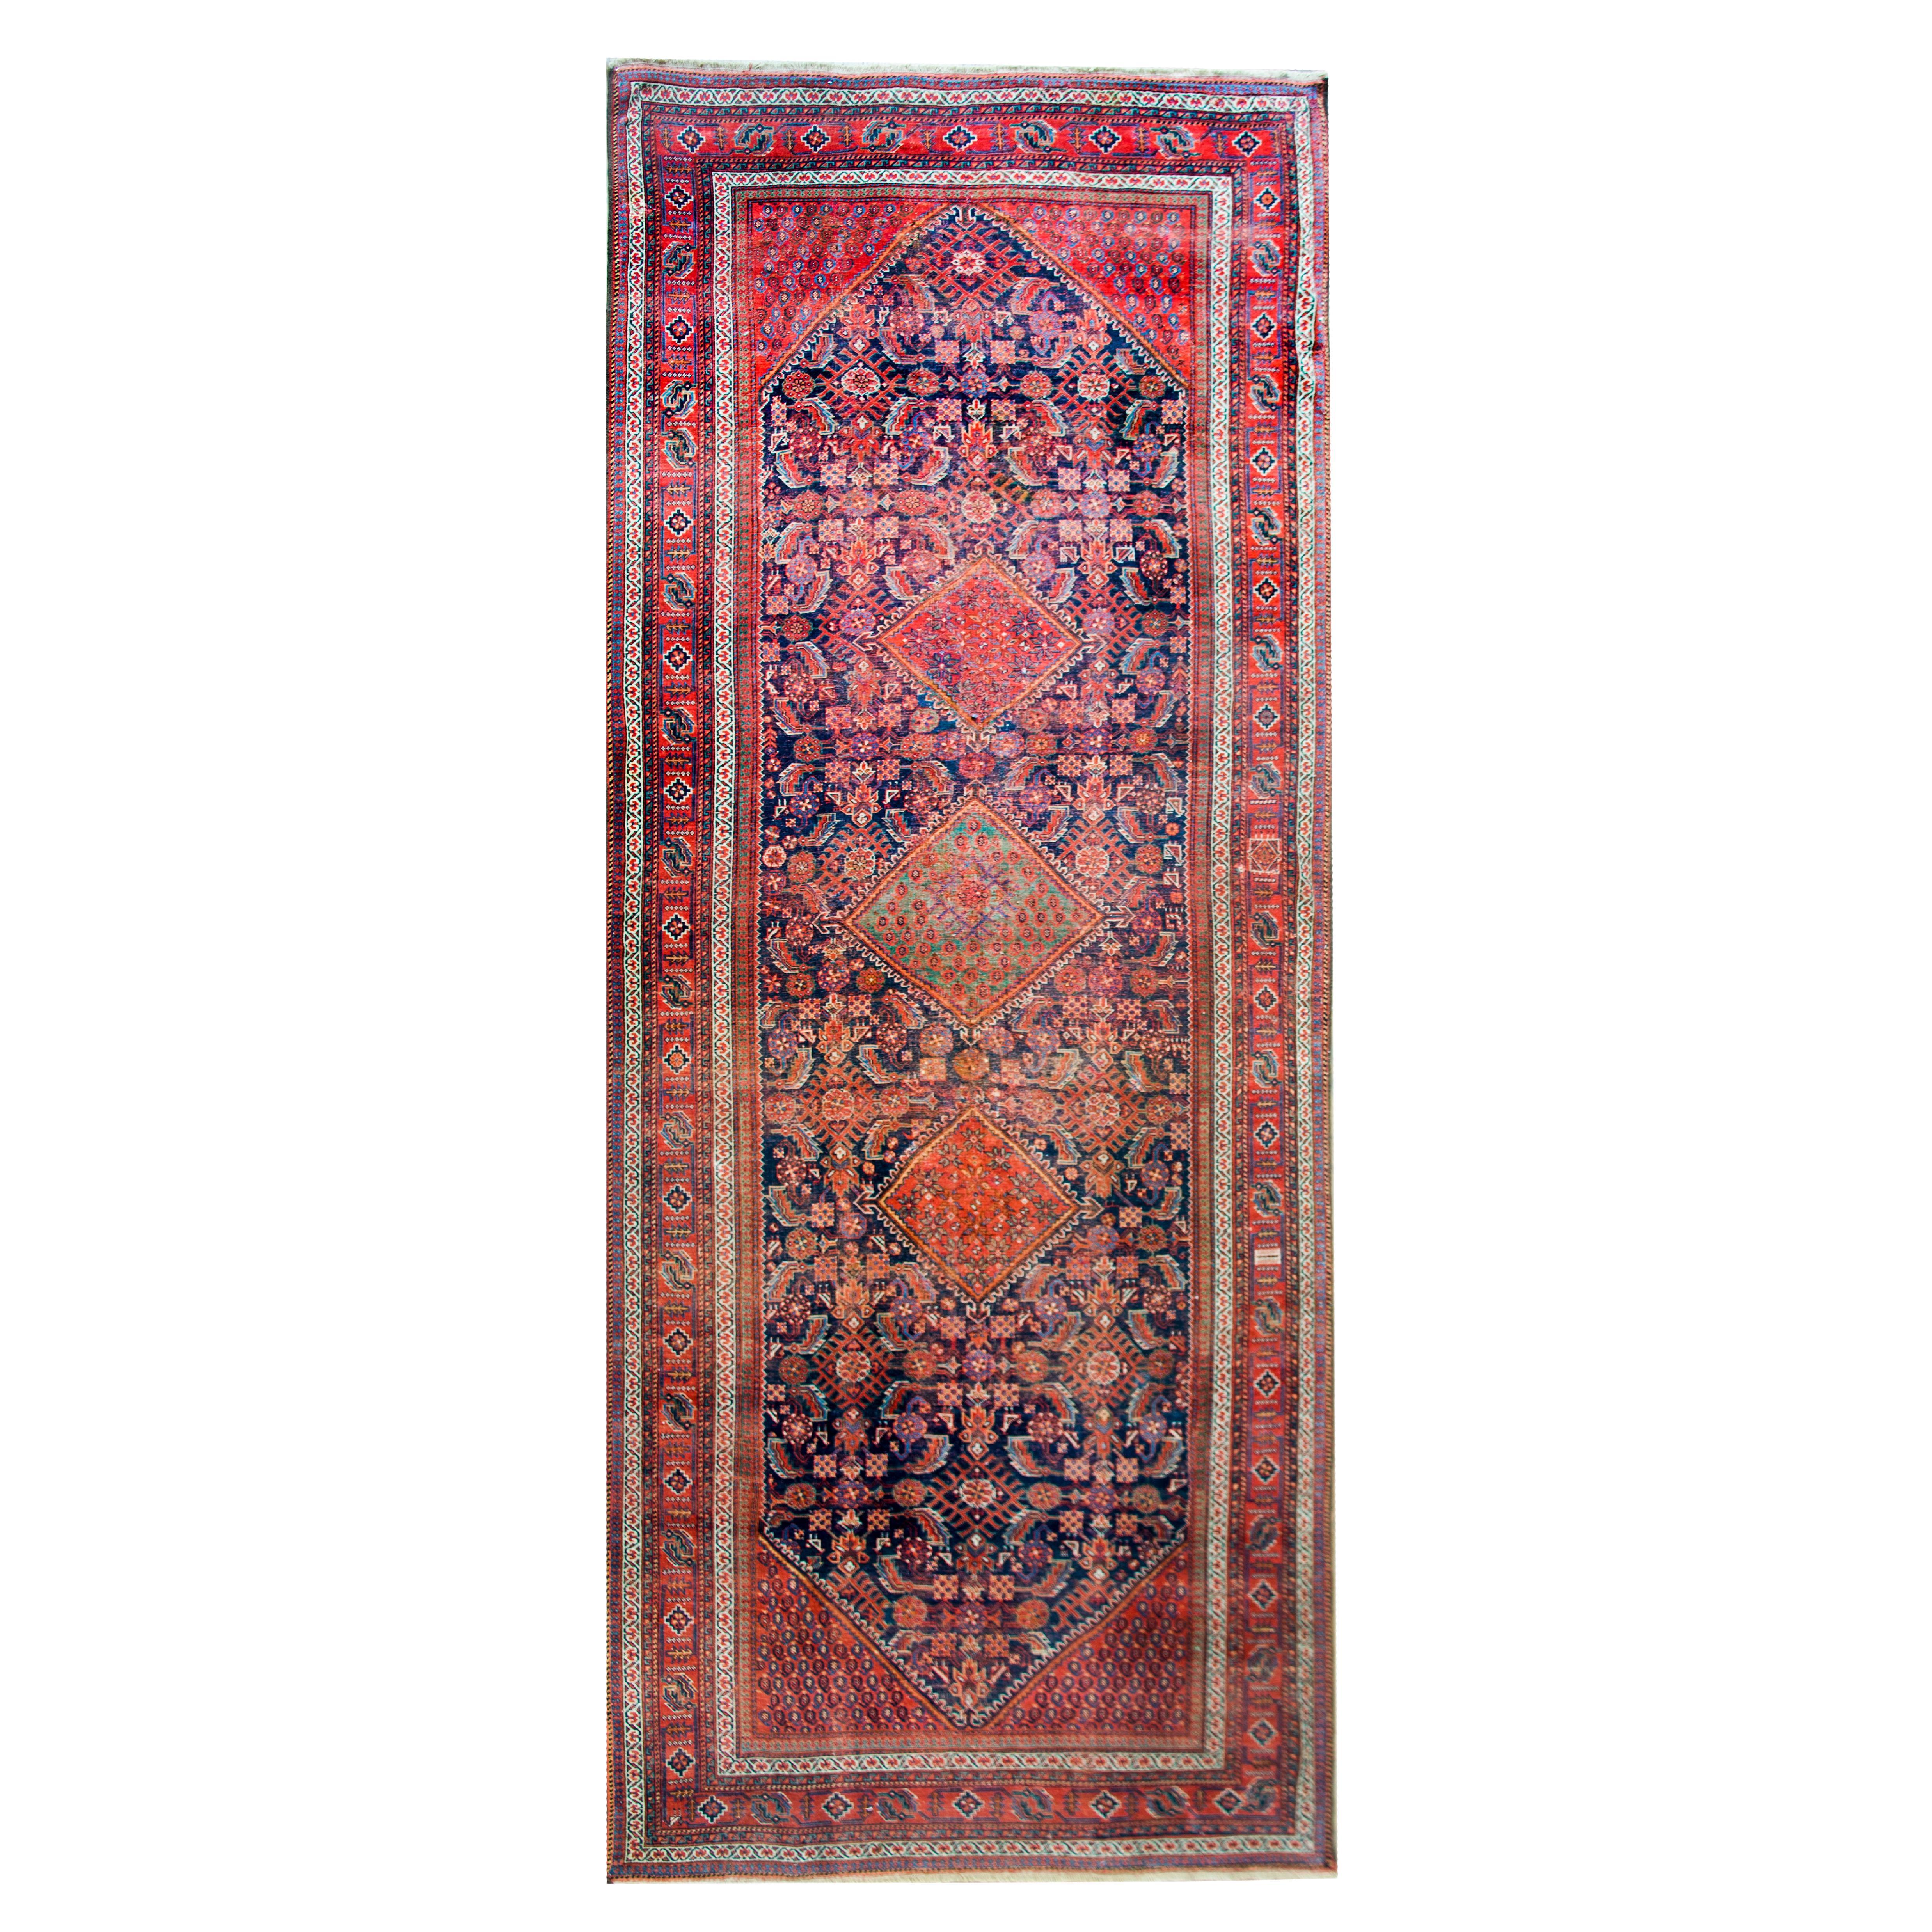 Early 20th Century, Persian Afshar Rug